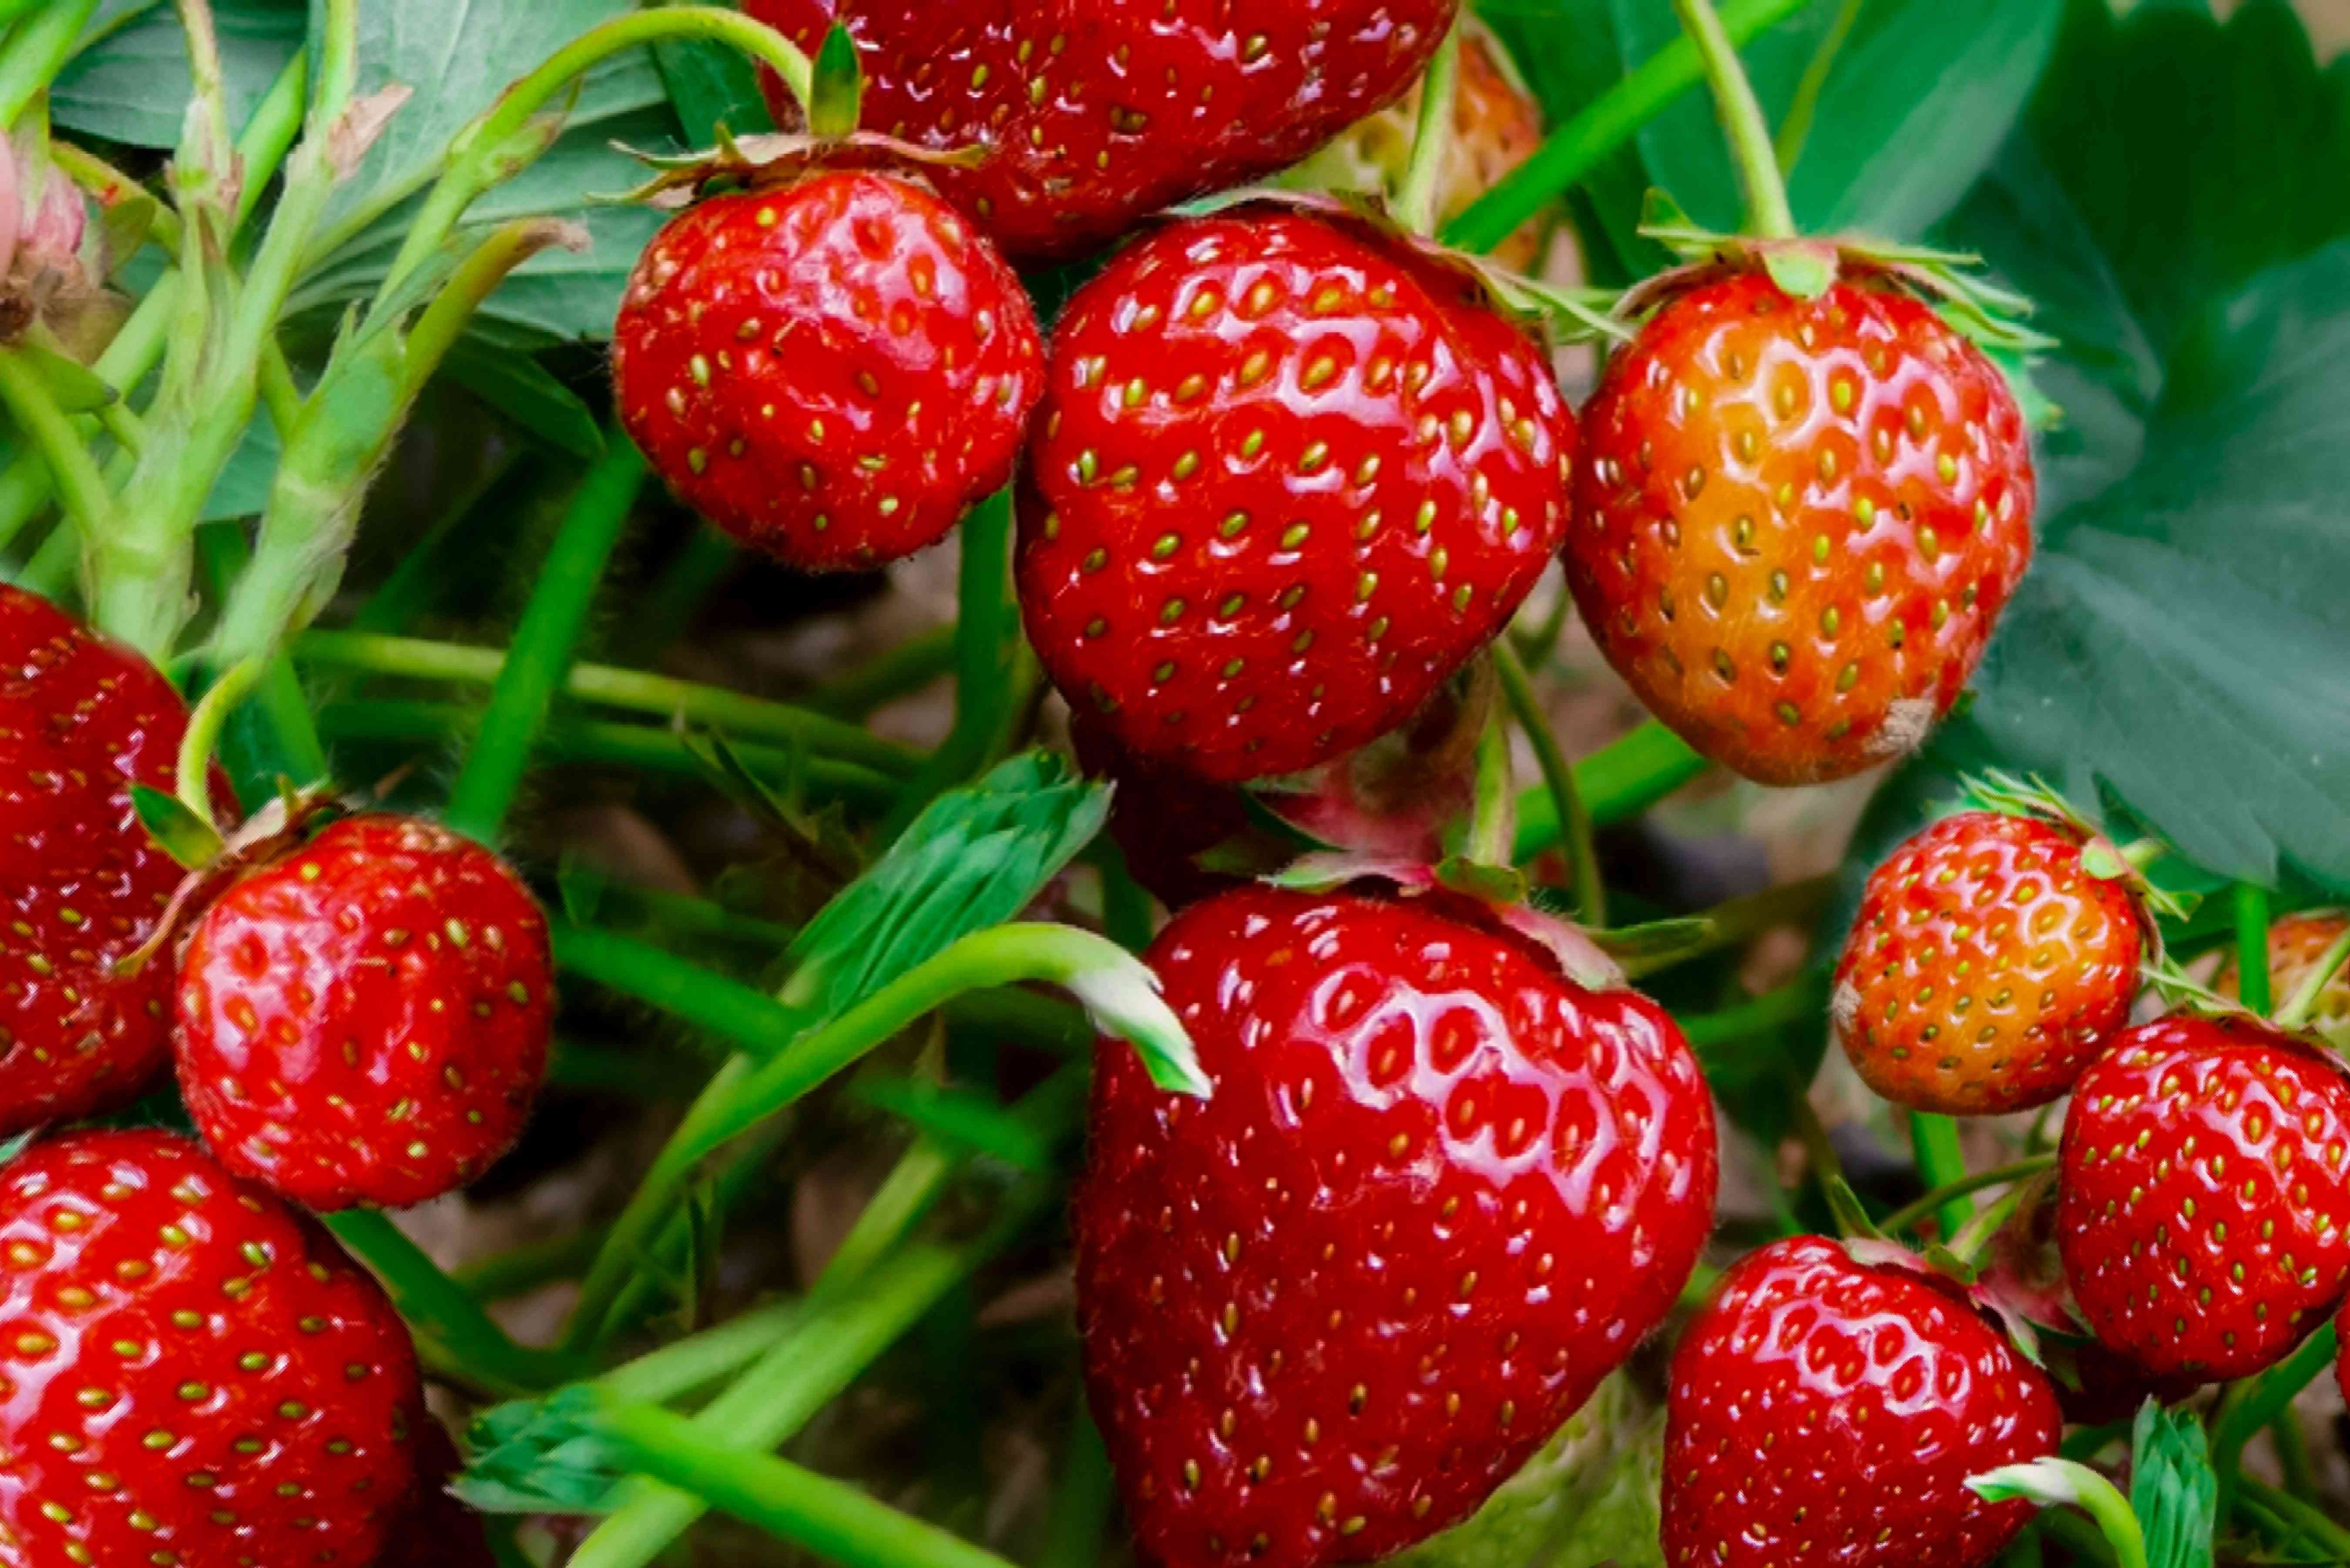 How to grow alpine strawberries – expert tips for healthy plants and tasty harvests